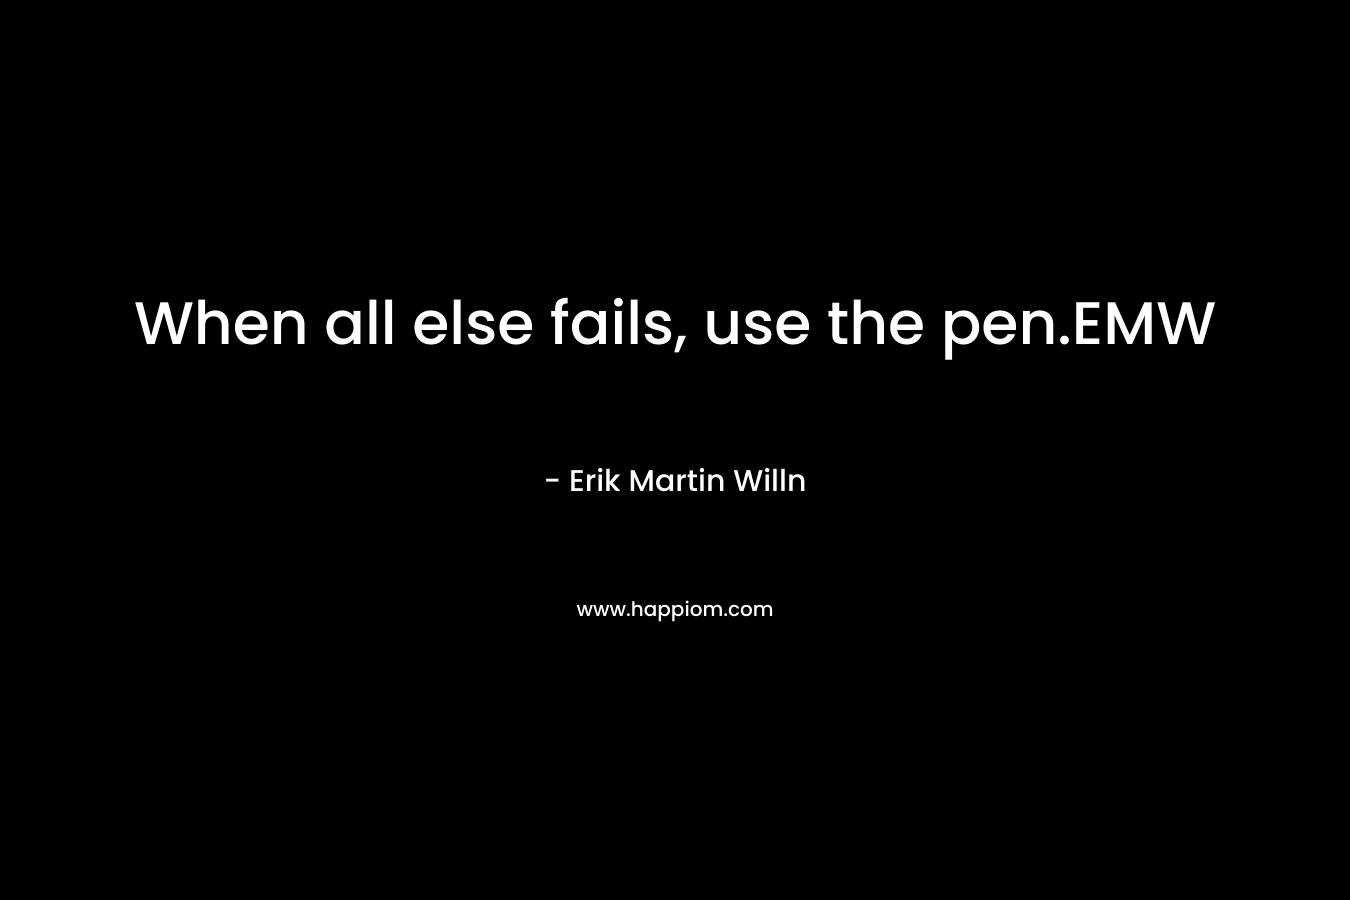 When all else fails, use the pen.EMW